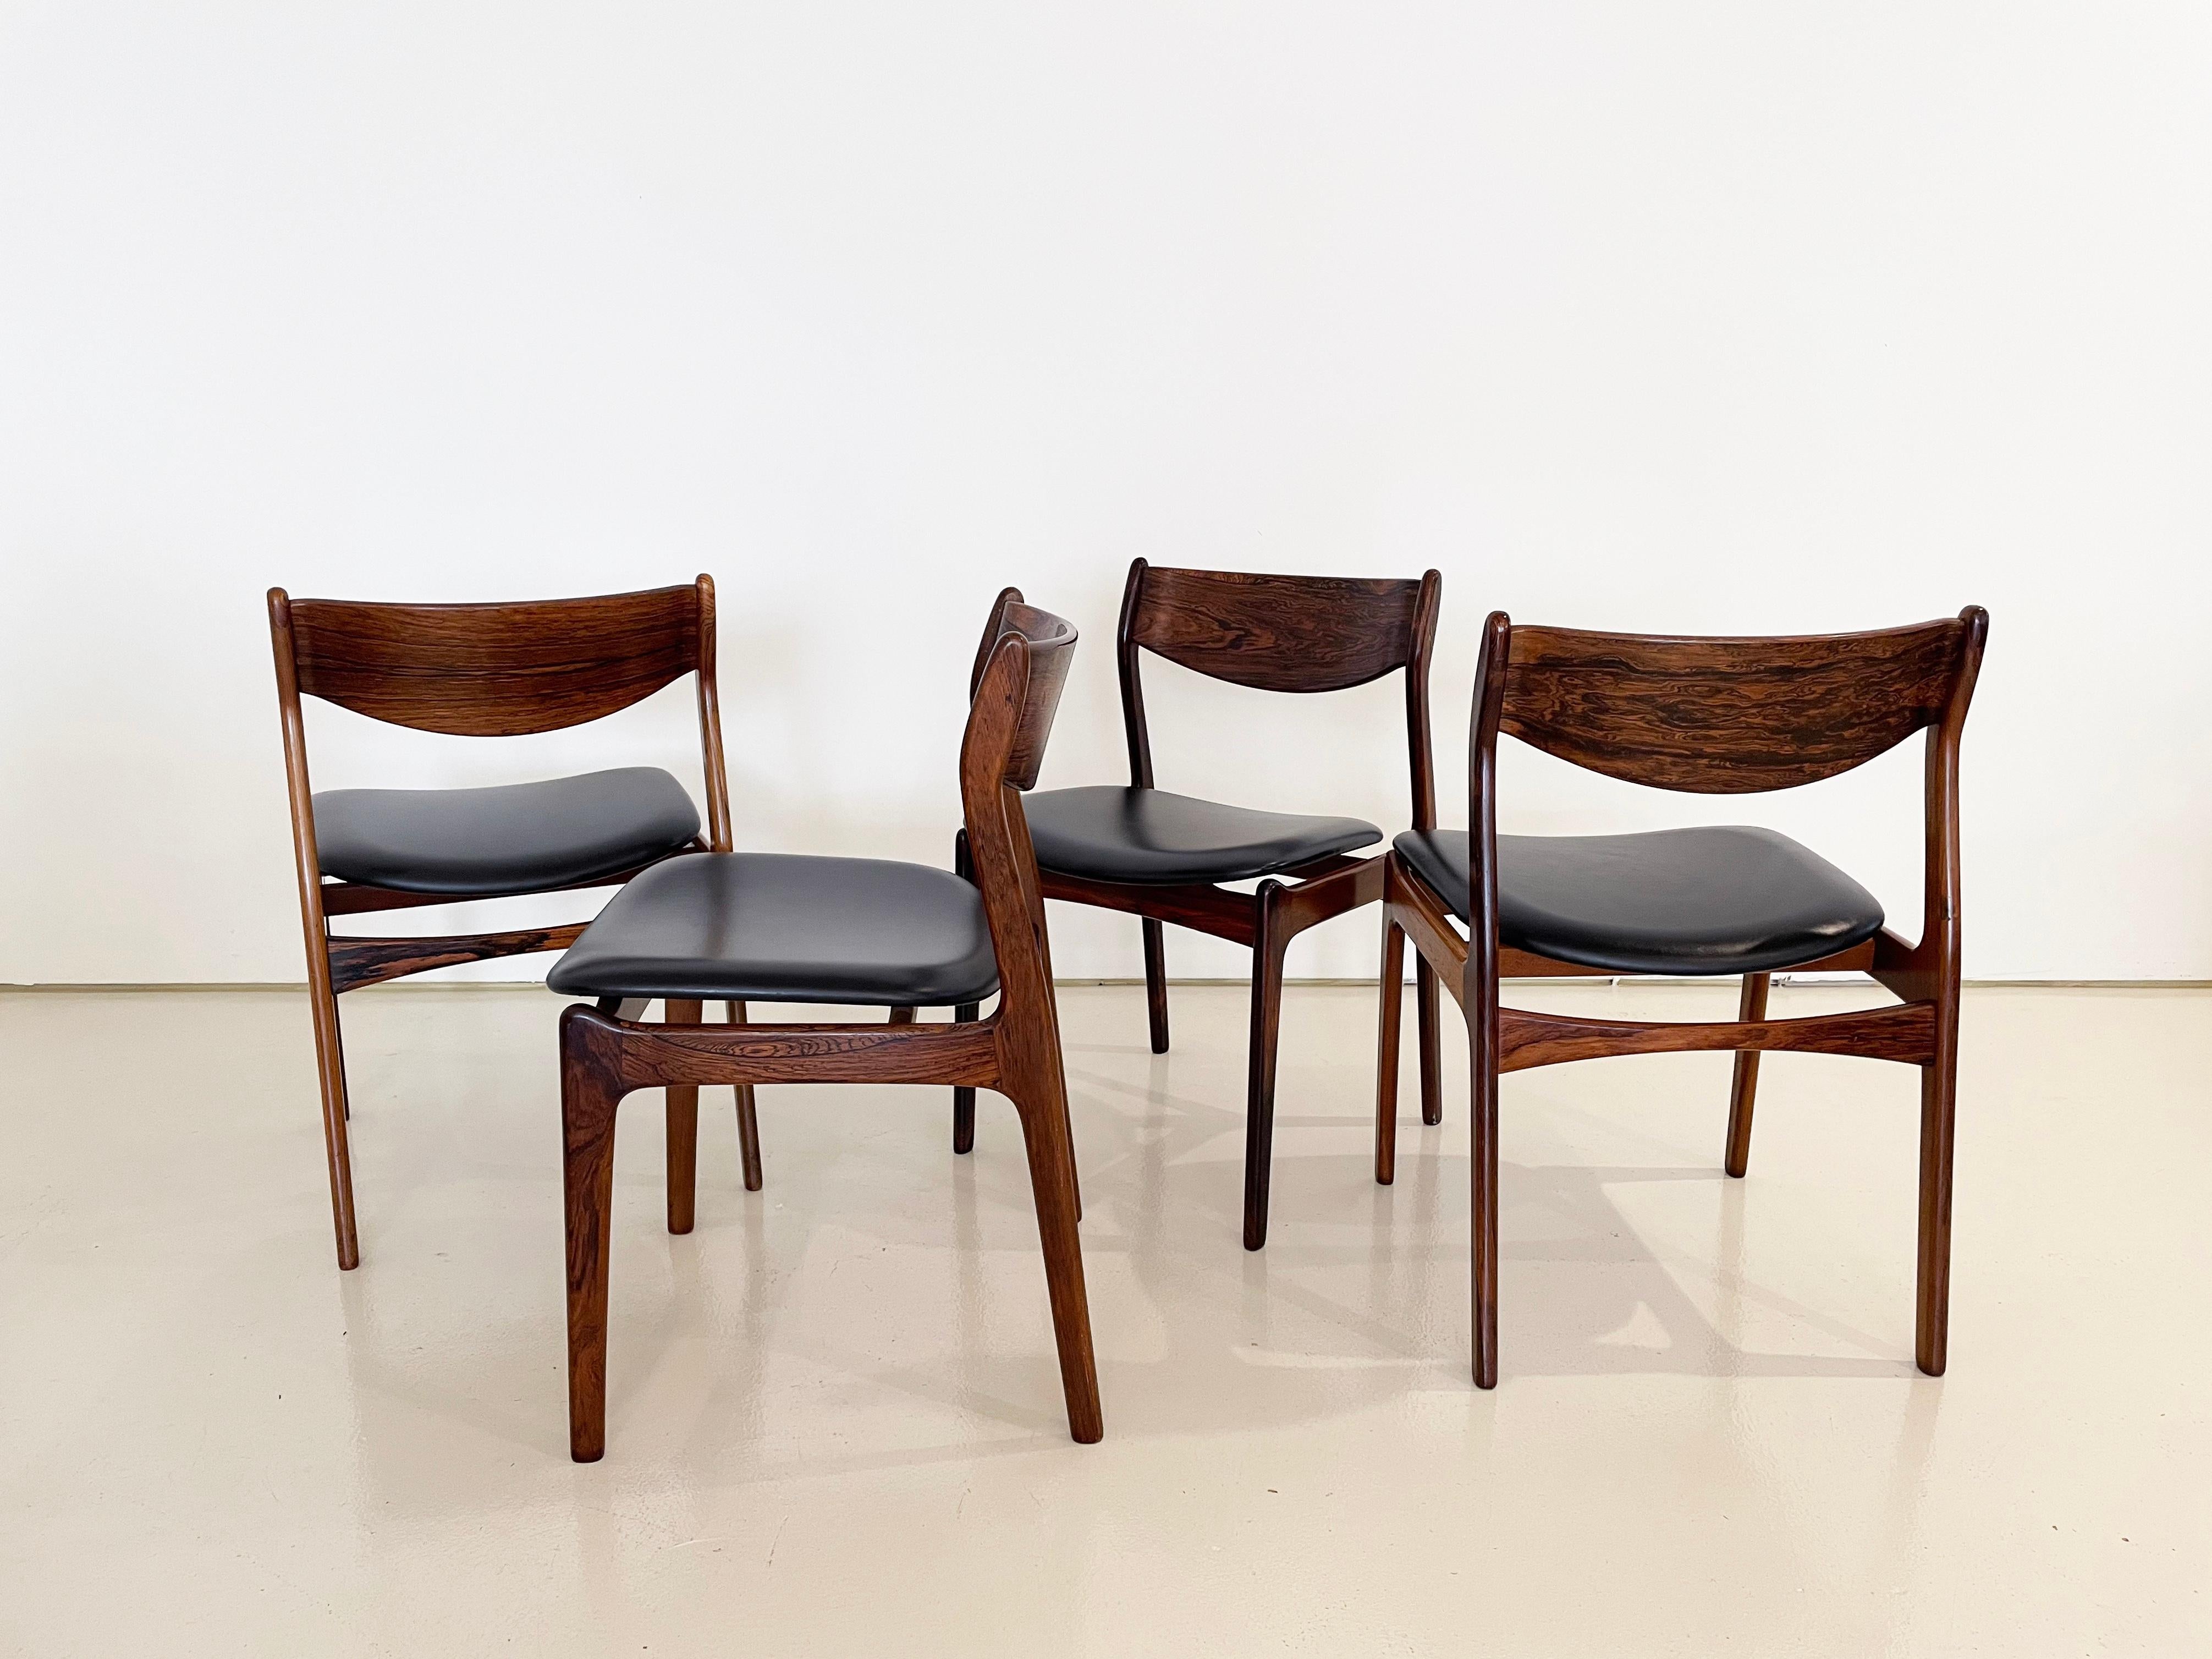 Vintage Mid-century Danish Dining Chairs, Designed by P.E. Jorgensen, Set of 8 For Sale 8